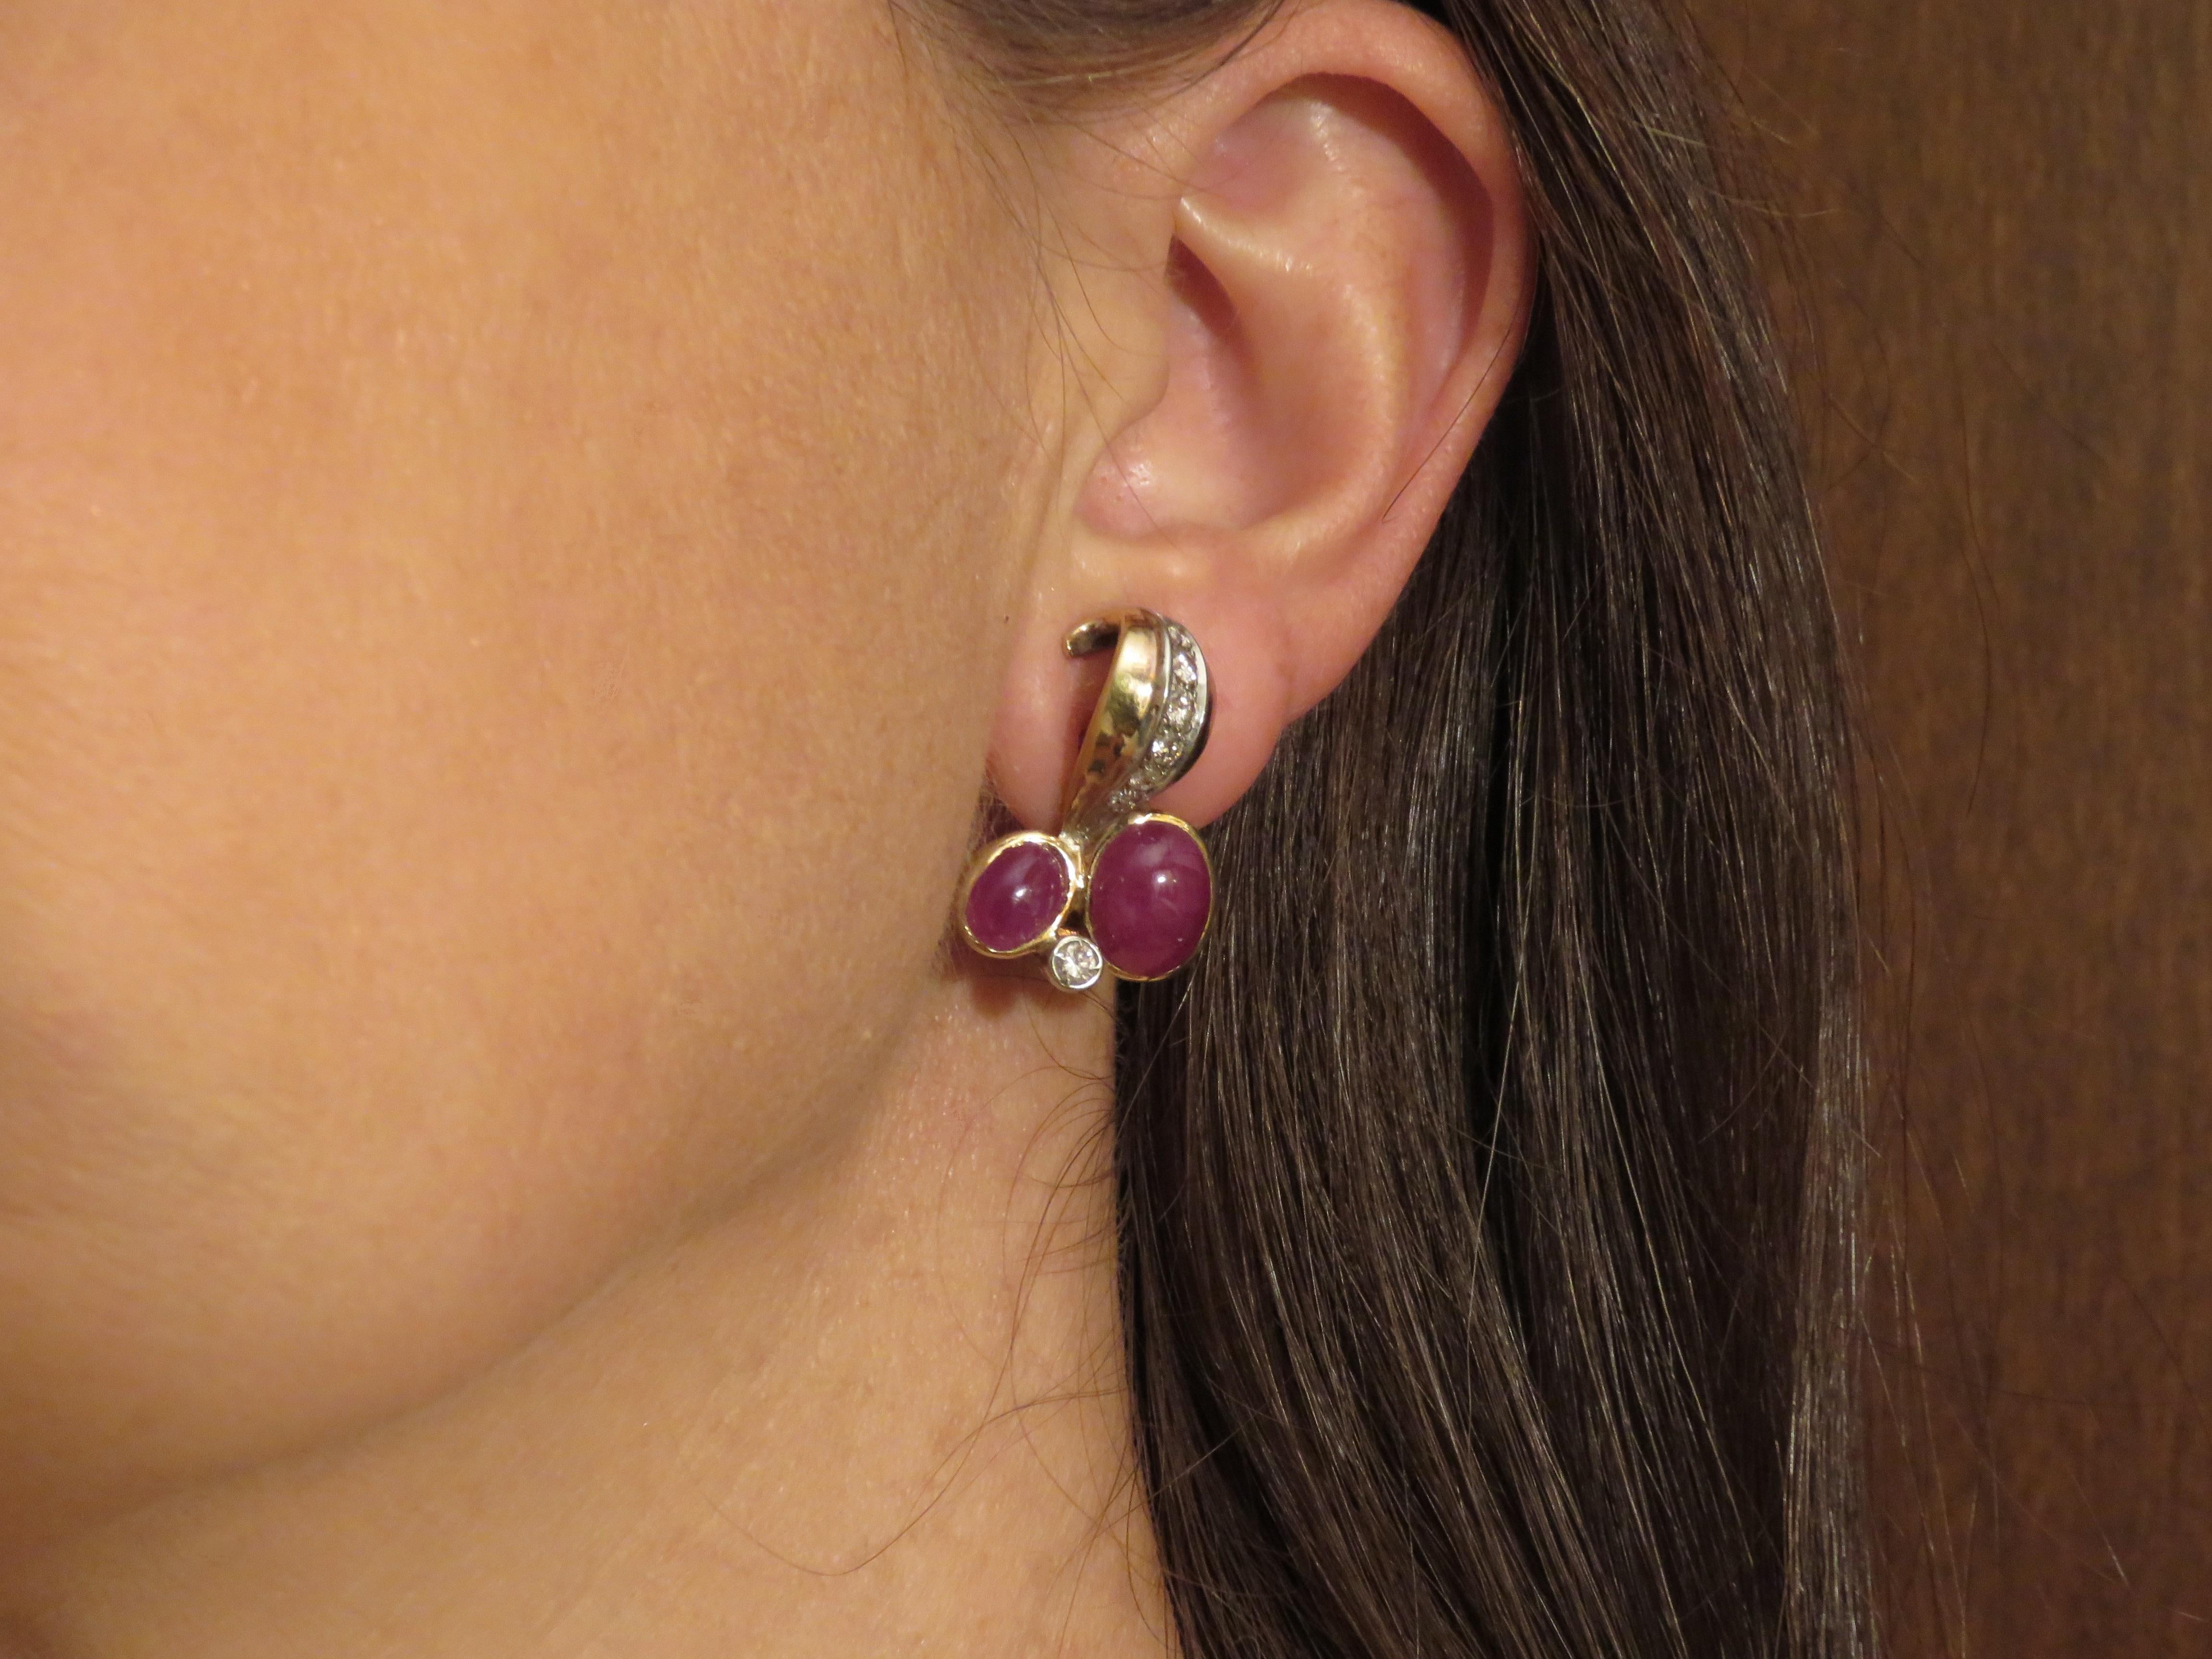 1980s clip-on earrings in 18k yellow gold with cabochon rubies and diamonds 0.35 ctw circa.
The total lenght of each earring is 25mm / 0,984252 inches.
They are stamped with the Italian Mark 750 -